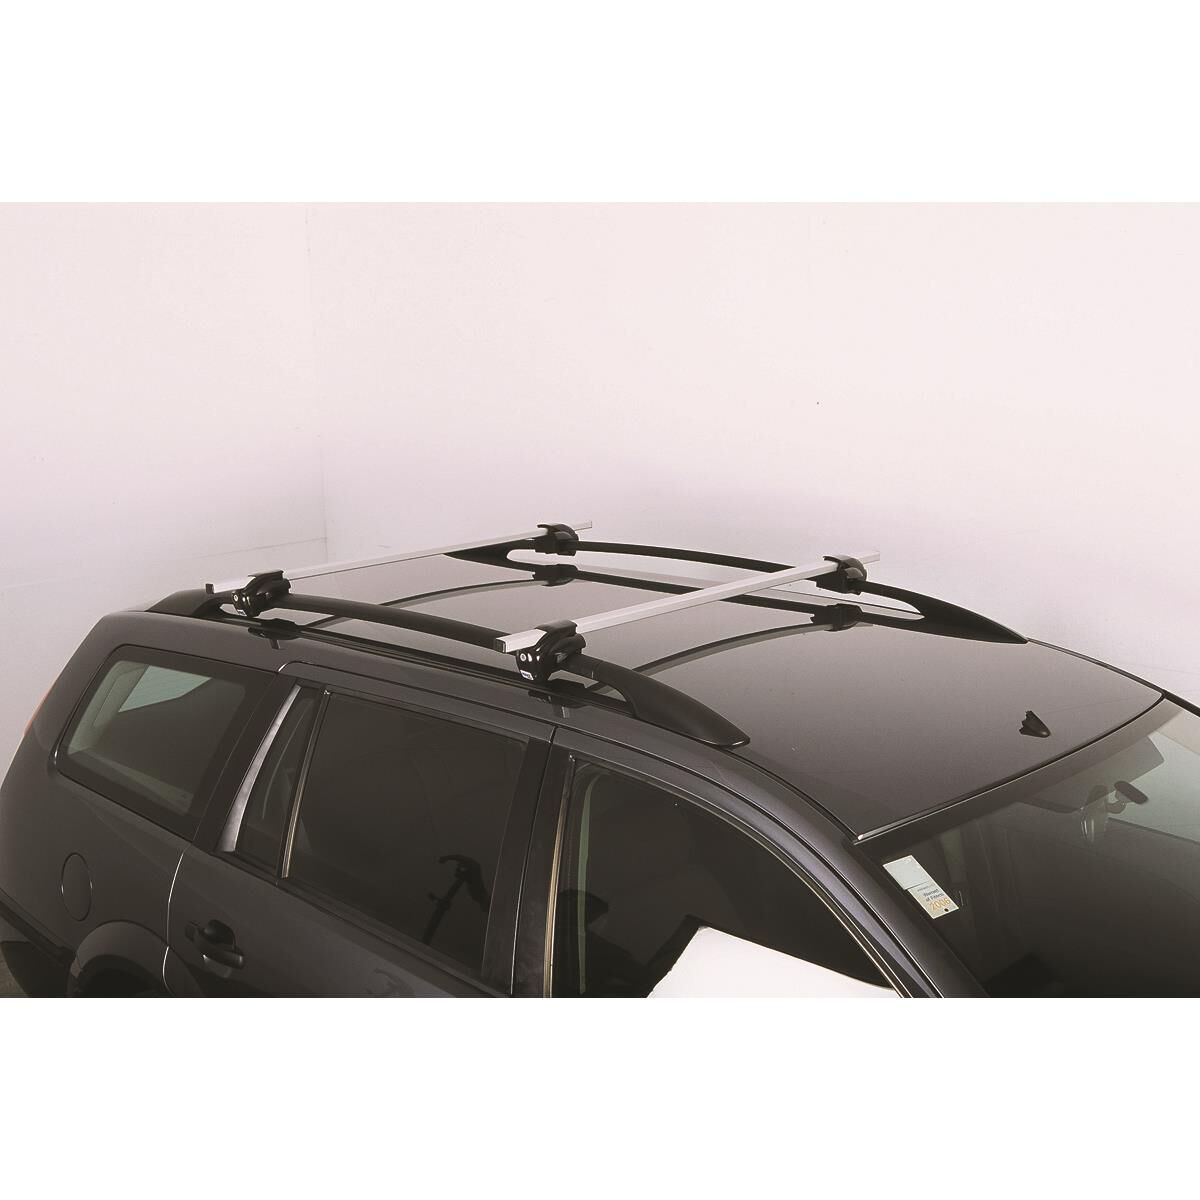 Pair Silver Aluminum Side Rails Car Roof Rack Cross Bars Mounted On Car Rooftop Archives Statelegals Staradvertiser Com